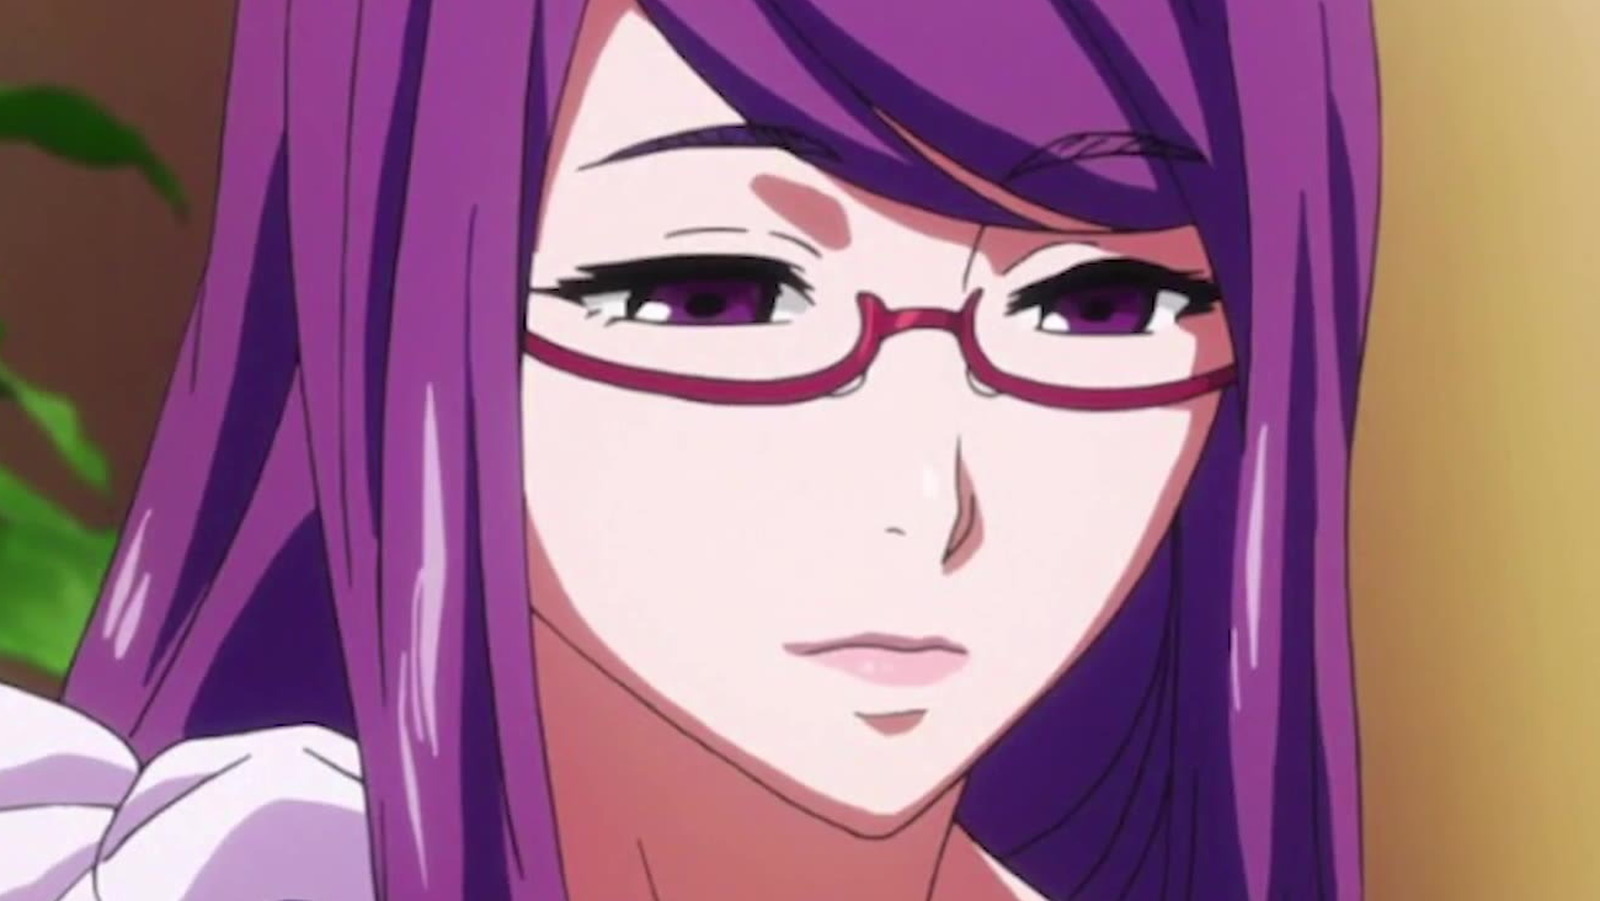 Why Rize Kamishiro From Tokyo Ghoul Sounds So Familiar